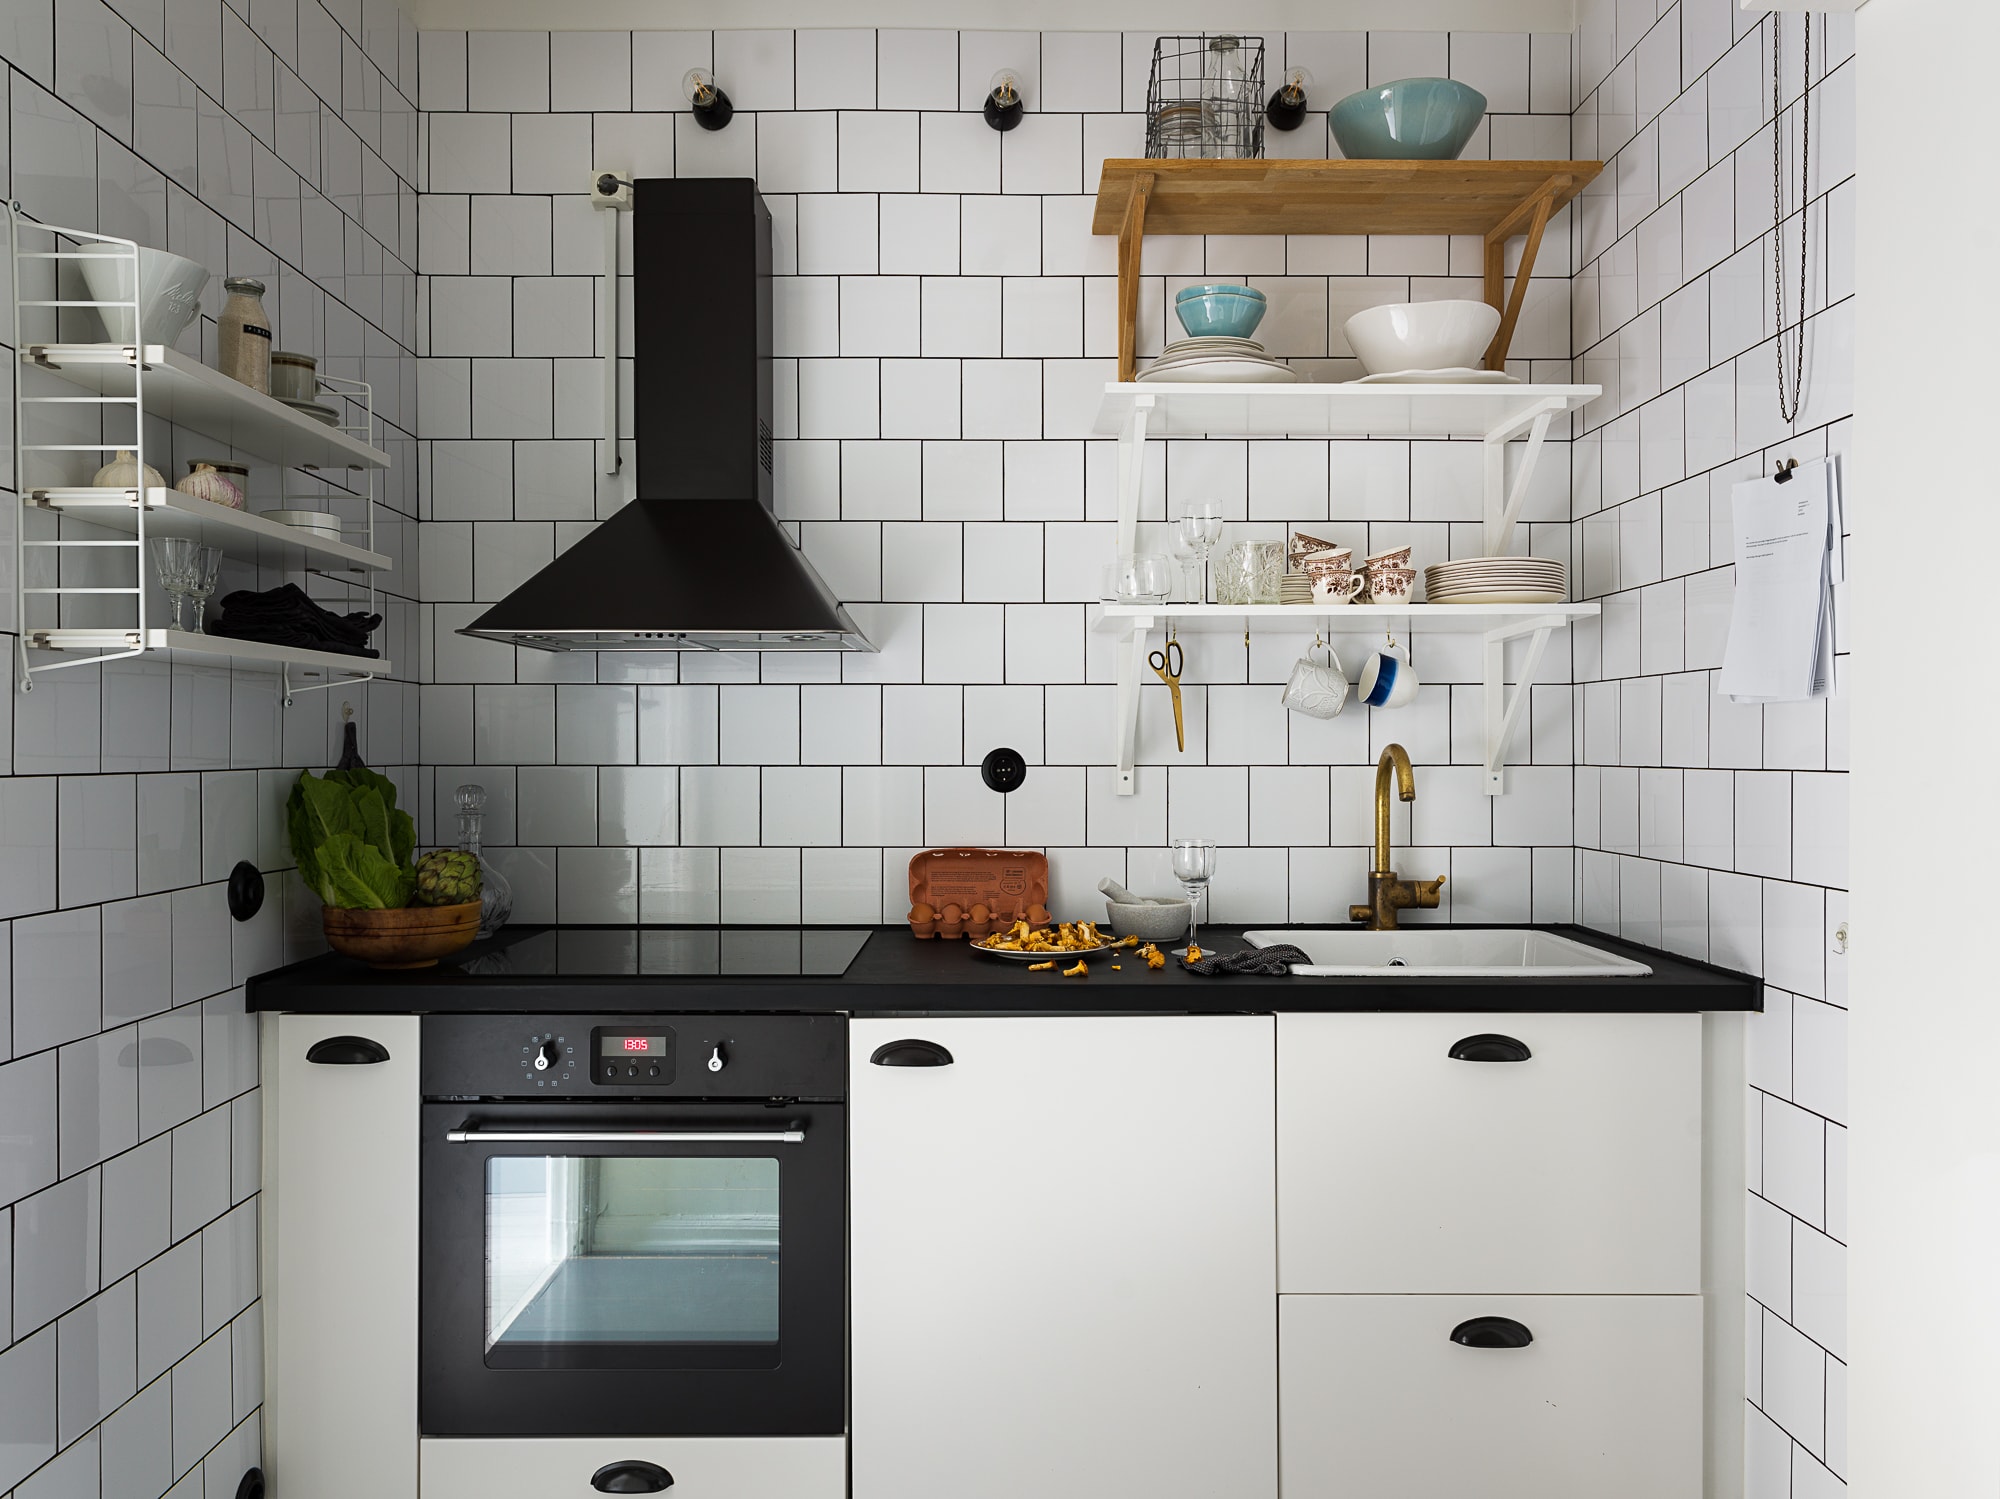 Small & Compact Kitchens